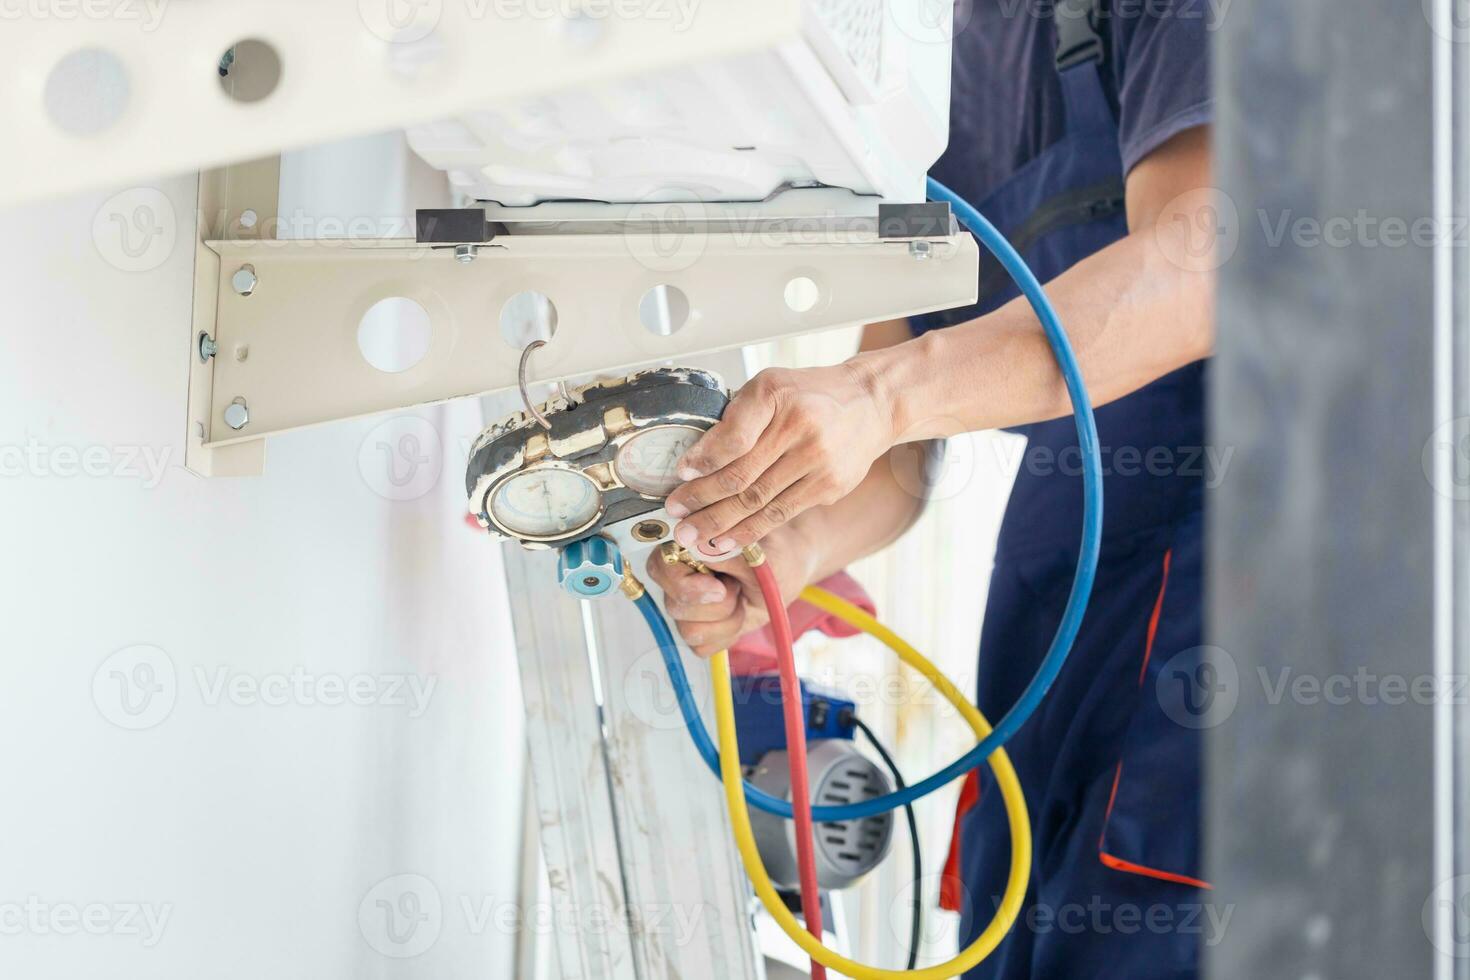 Repairman fixing air conditioner unit, Asian technician man installing an air conditioning in a client house, Maintenance and repairing concepts photo